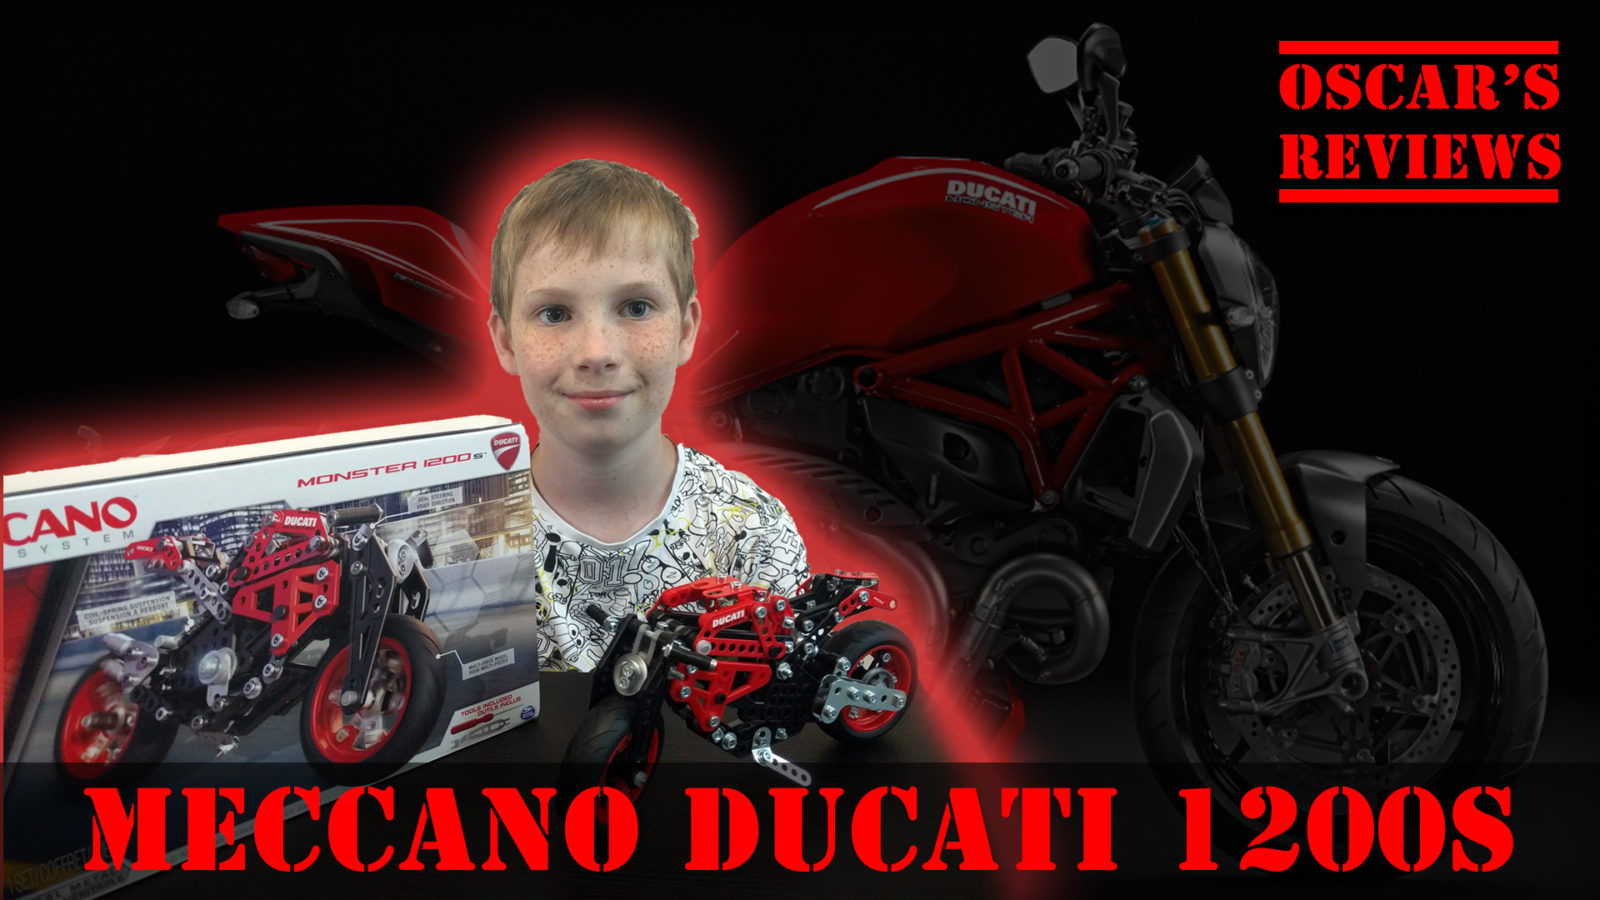 Meccano Ducati Monster 1200s – A Kid’s Review